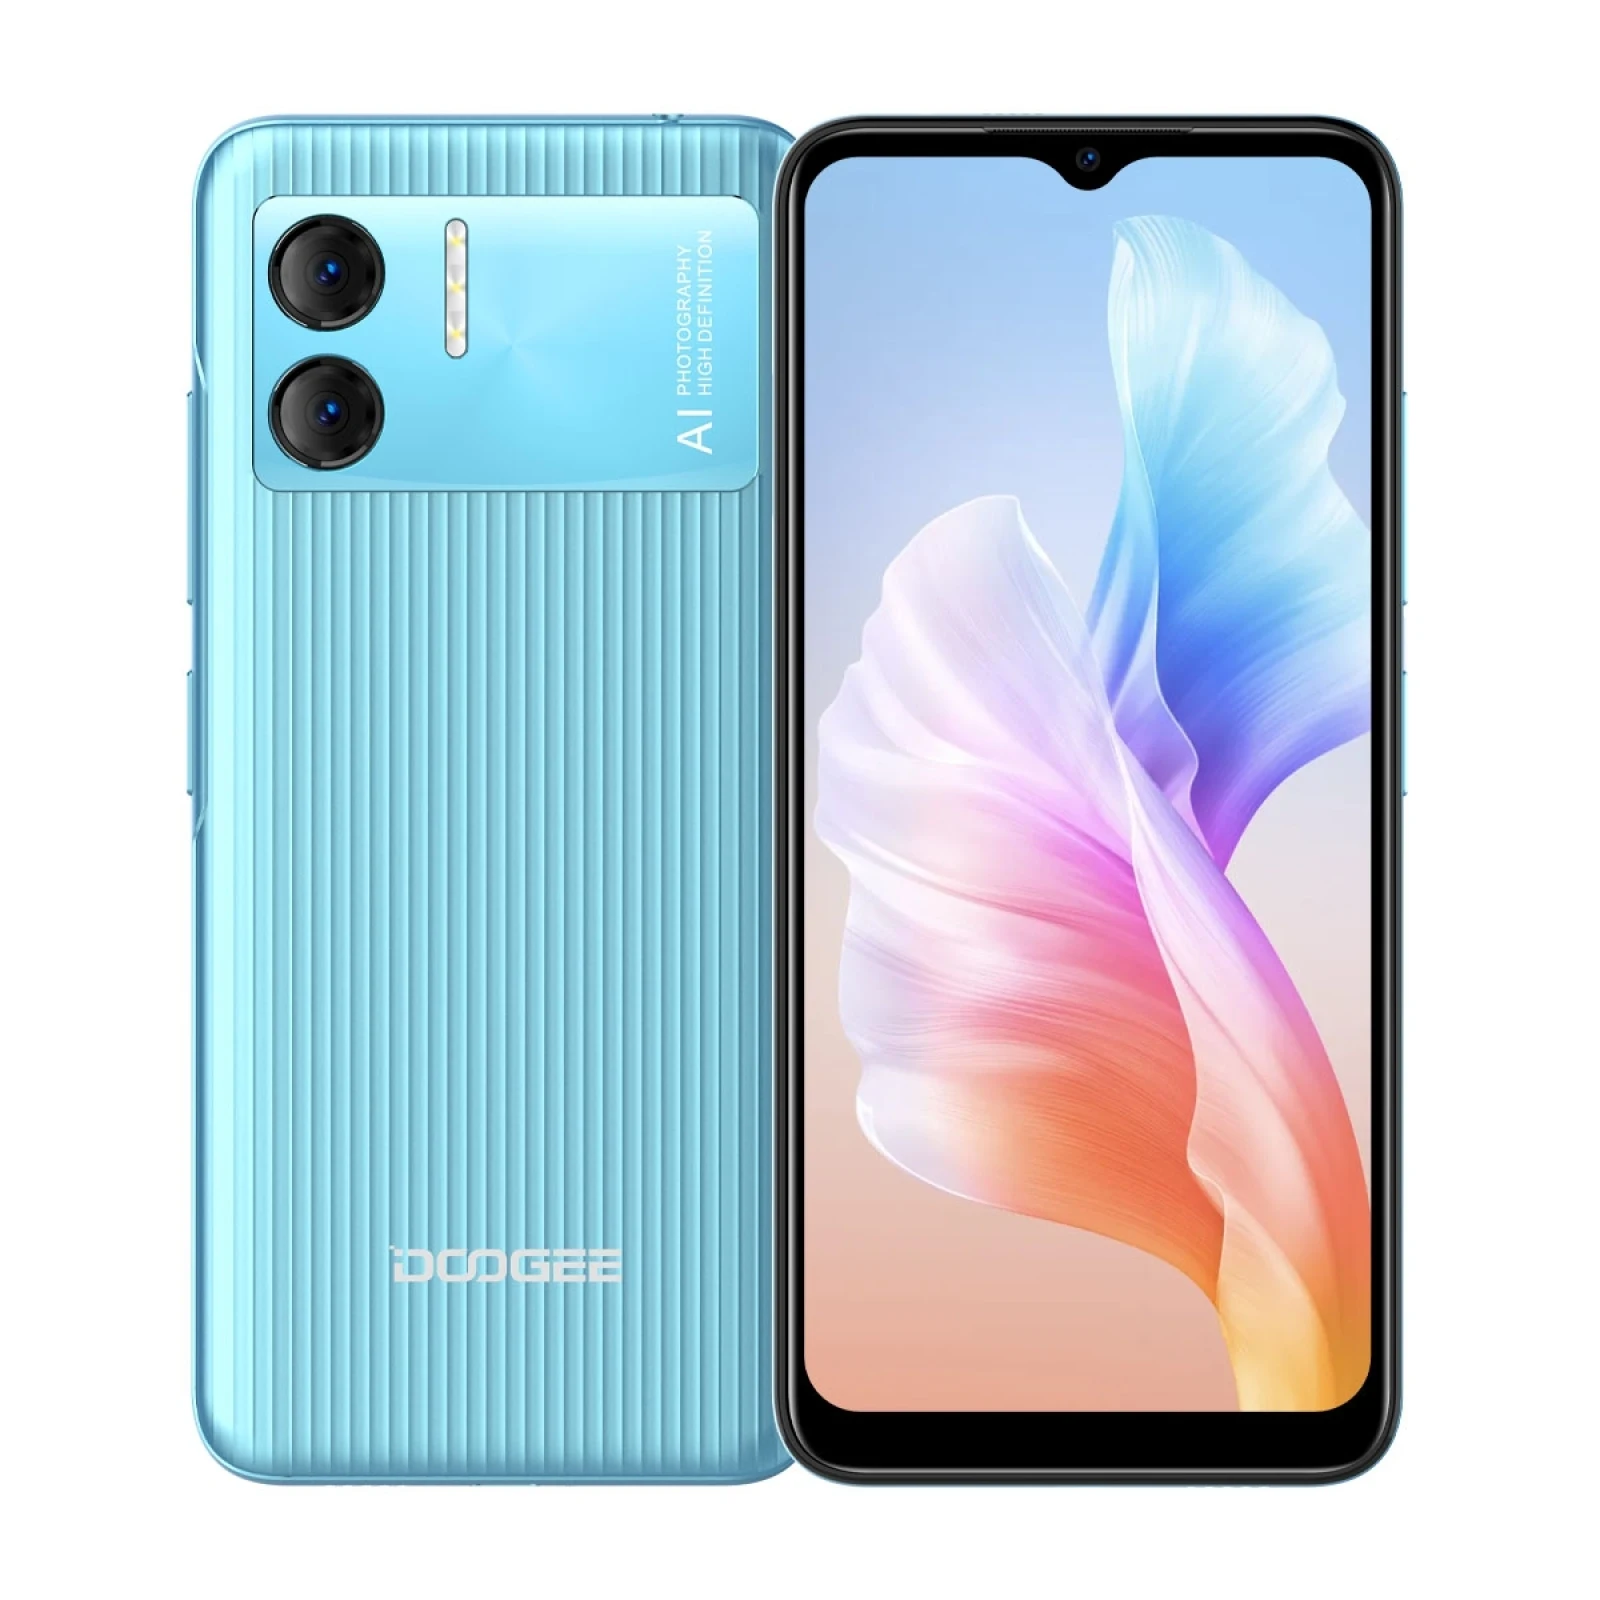 

DOOGEE X98 Smartphone 6.52" HD+ Waterdrop Screen 3GB+16GB A22 Quad core 2.0GHz Android 12 Mobile 8MP Back Camera 4200mAh Face ID